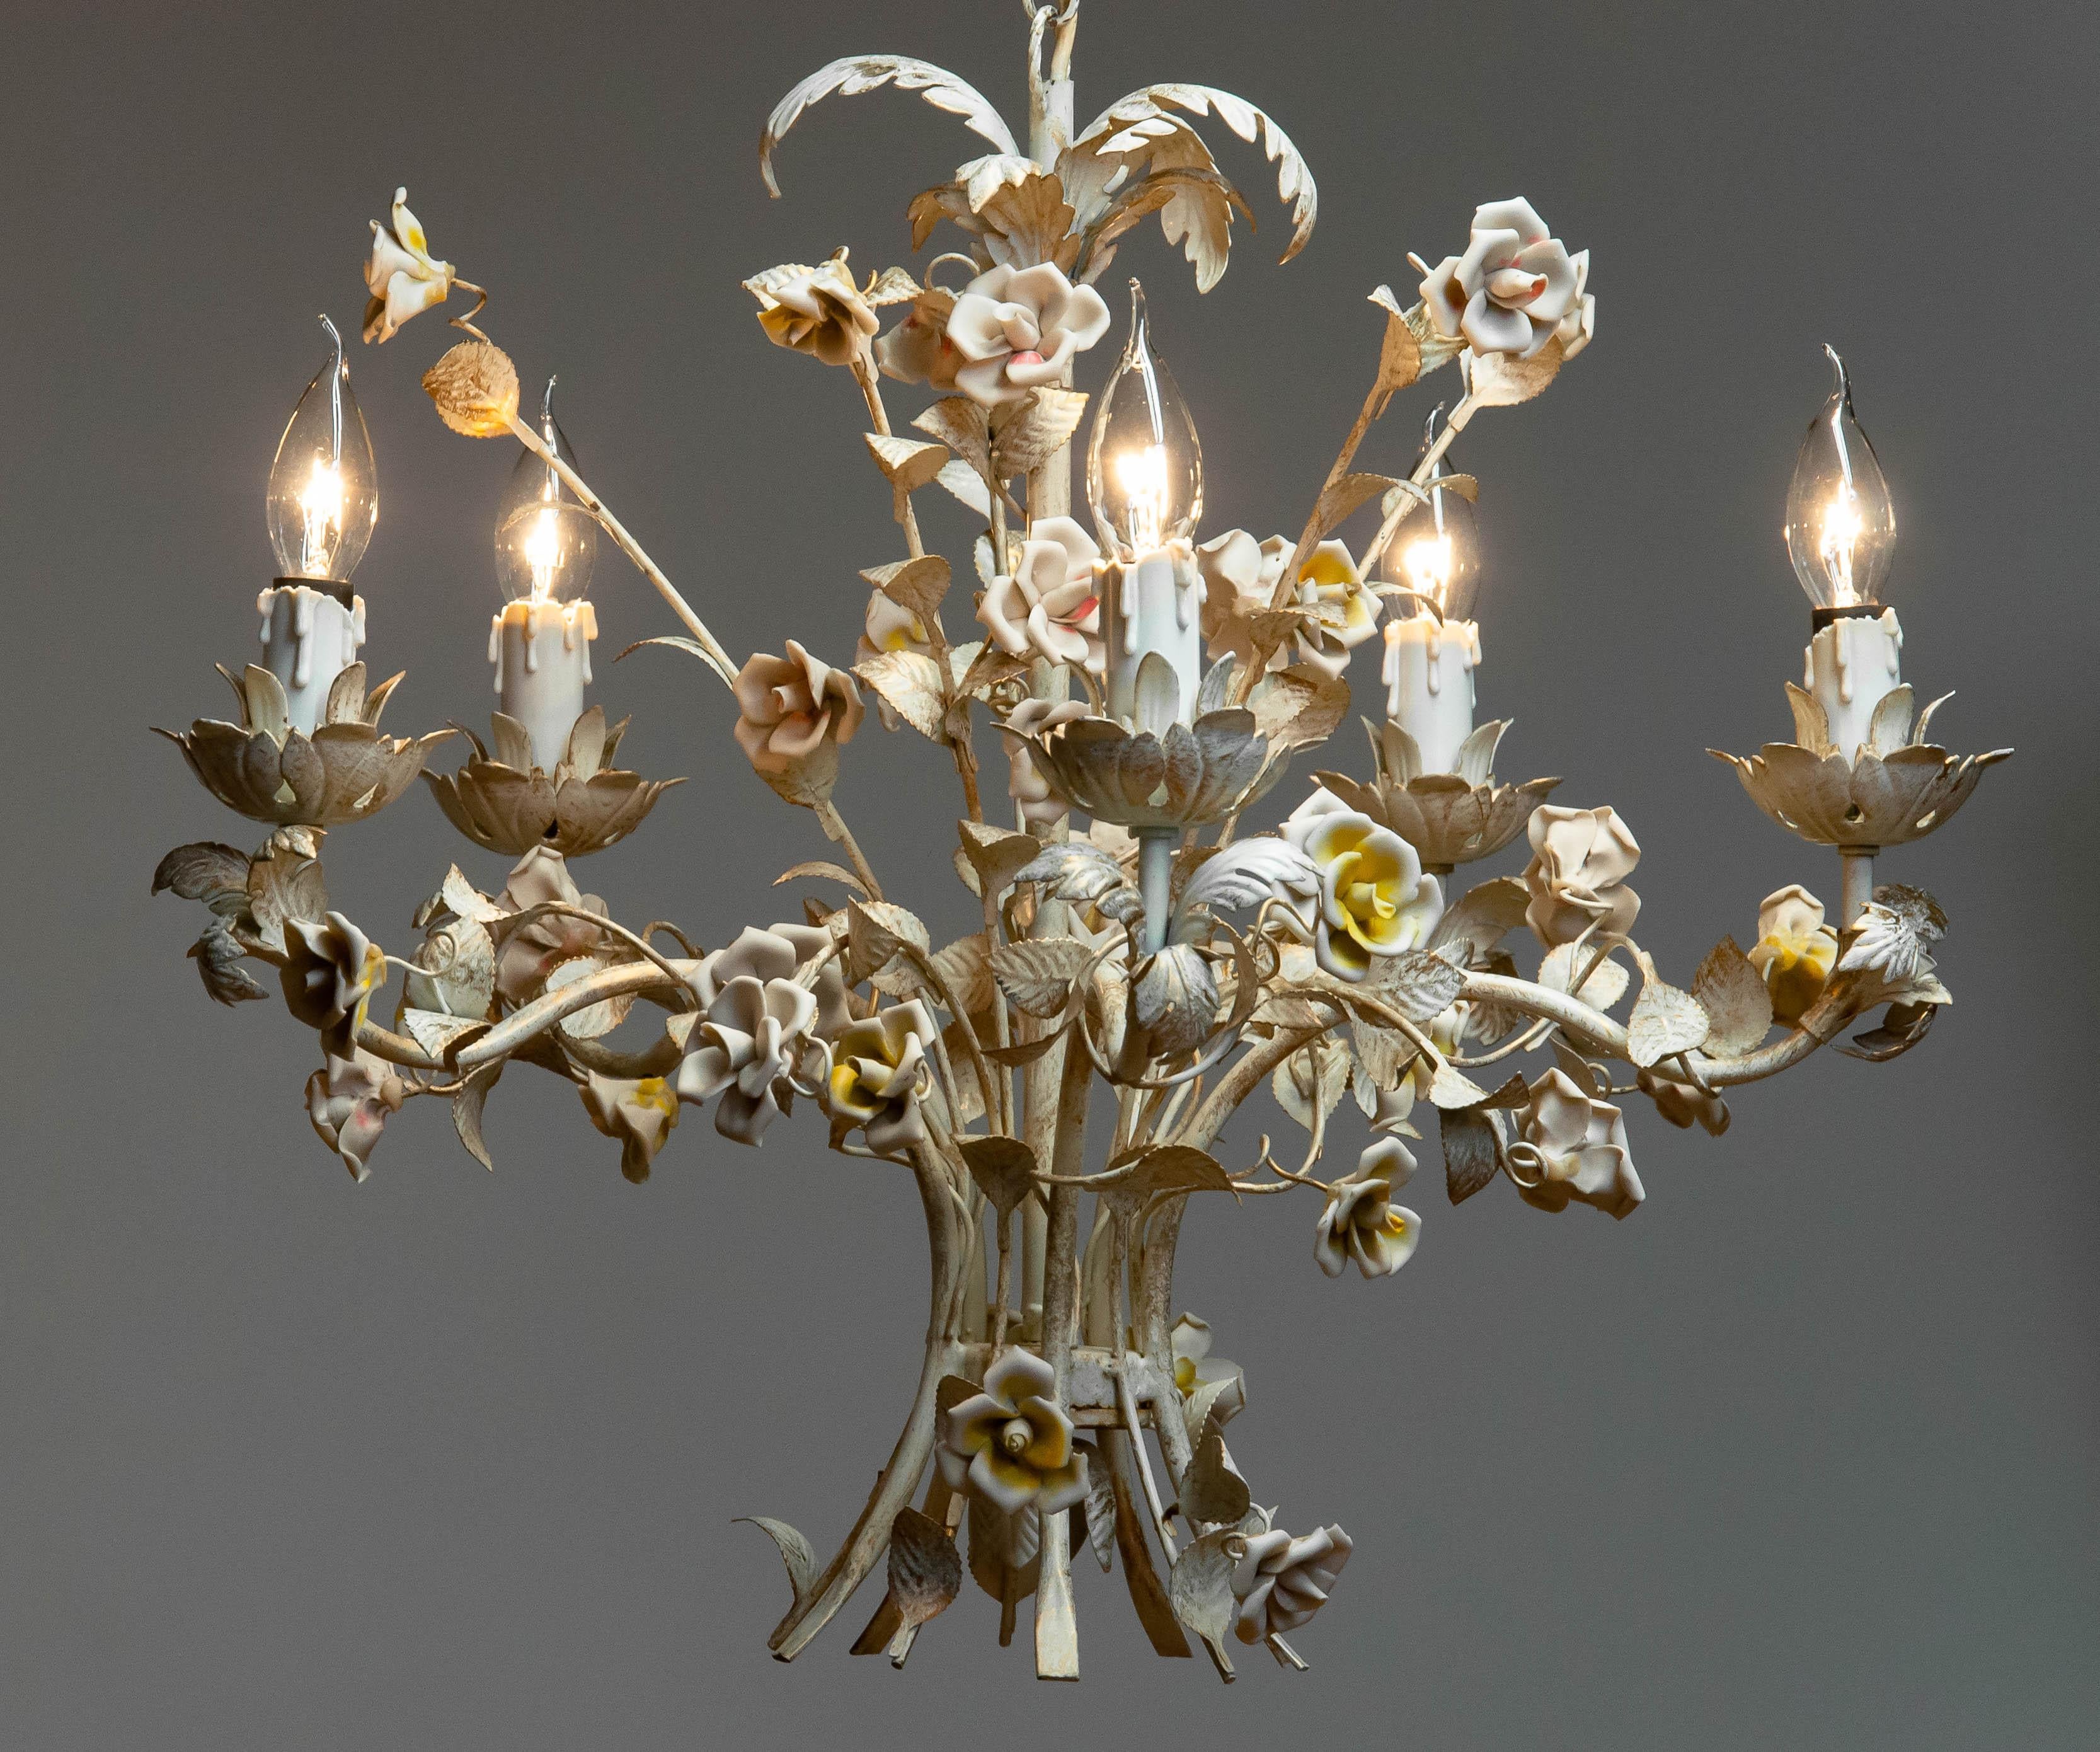 Mid-20th Century 1960s Boho Chic Italian Pastel Color Painted Metal Chandelier With Floral Decor For Sale